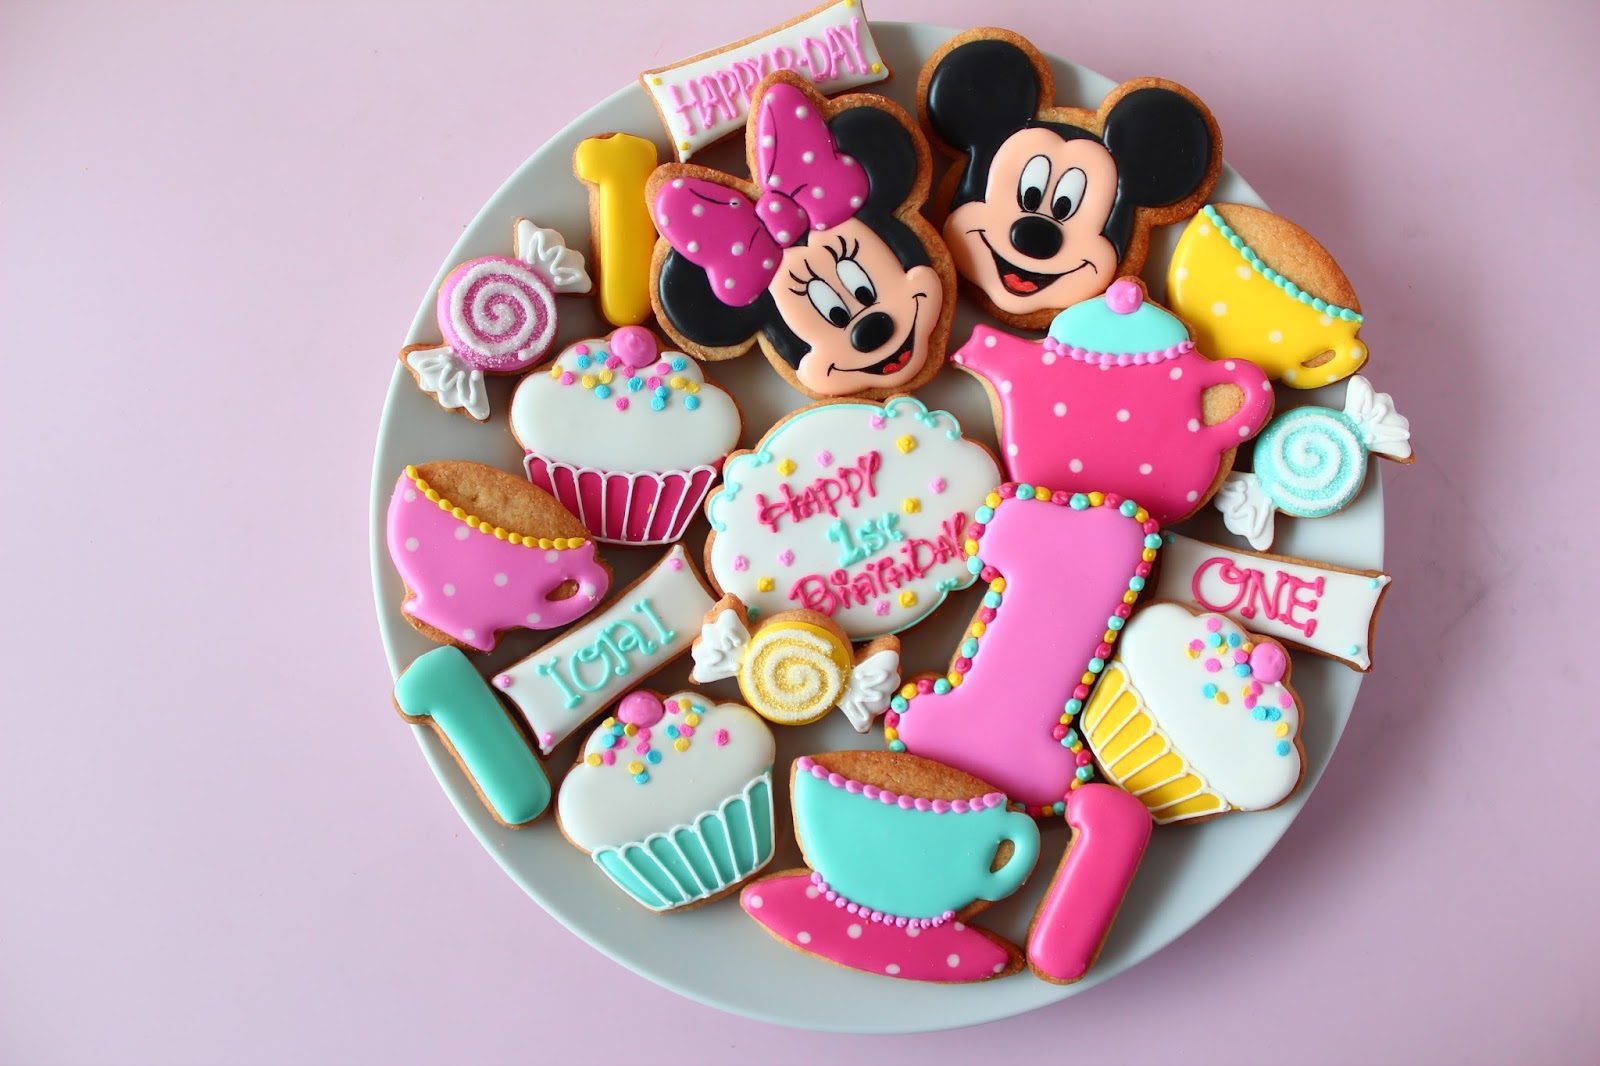 Sweeten your day.: Mickey＆Minnie cookies ミッキー＆ミニーのアイシングクッキー